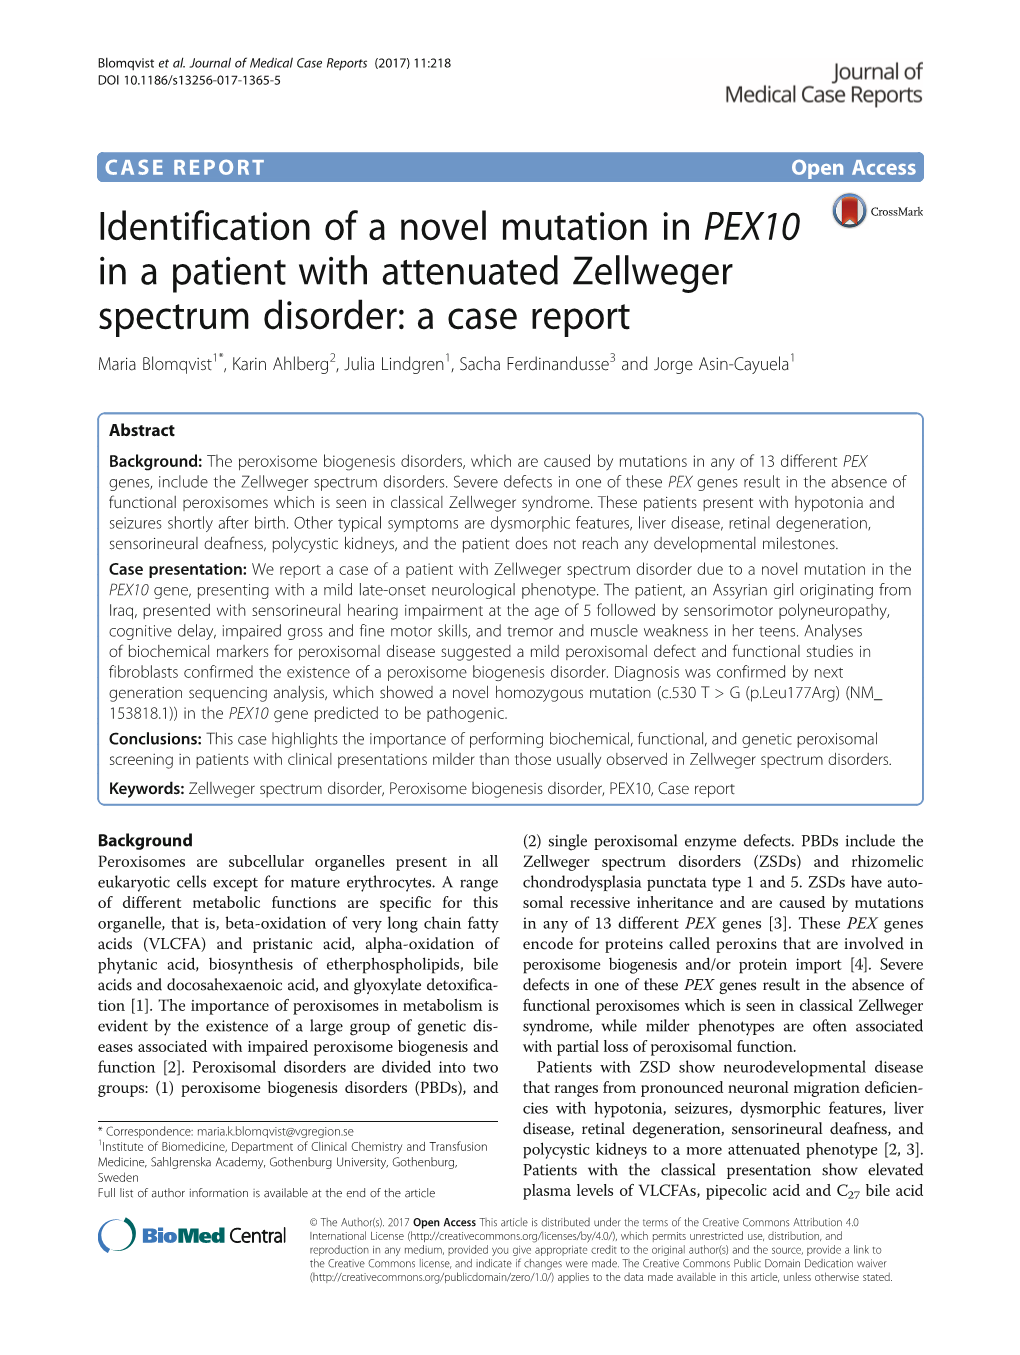 Identification of a Novel Mutation in PEX10 in a Patient with Attenuated